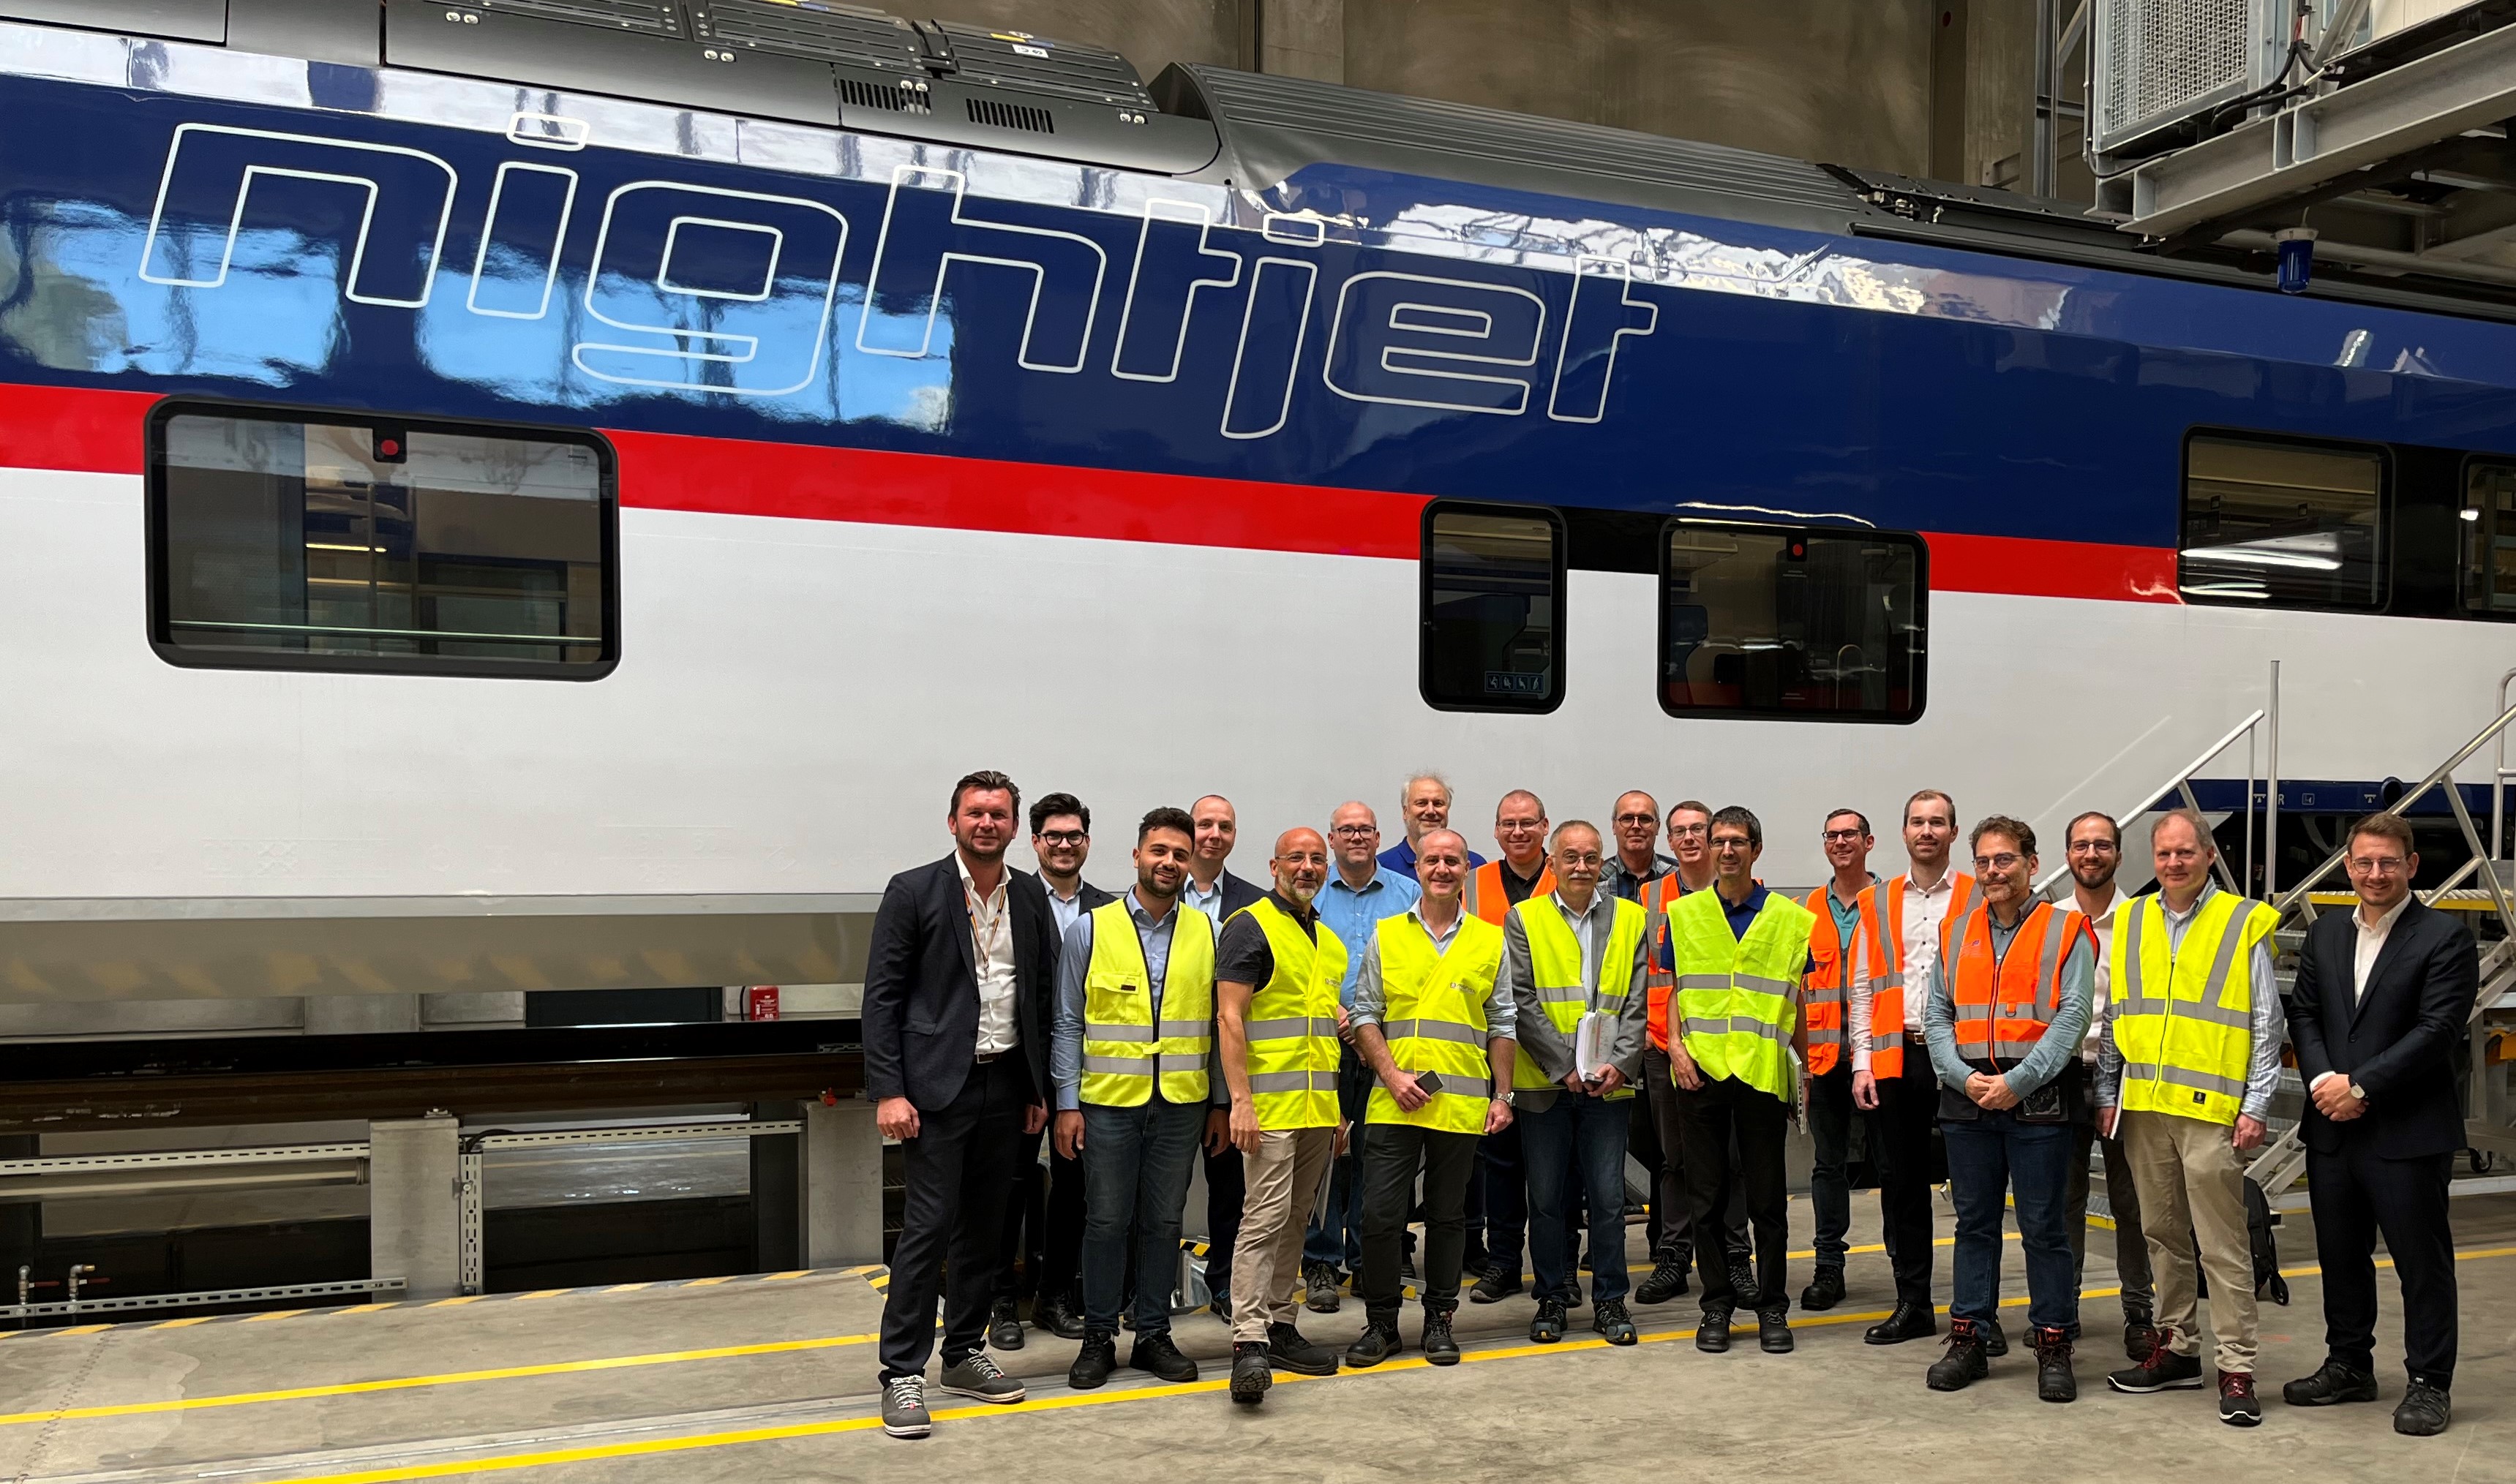 ERA Signs First Authorisation for New Generation Sleeper Trains: a Substantial Step for Reviving Night Trains in Europe